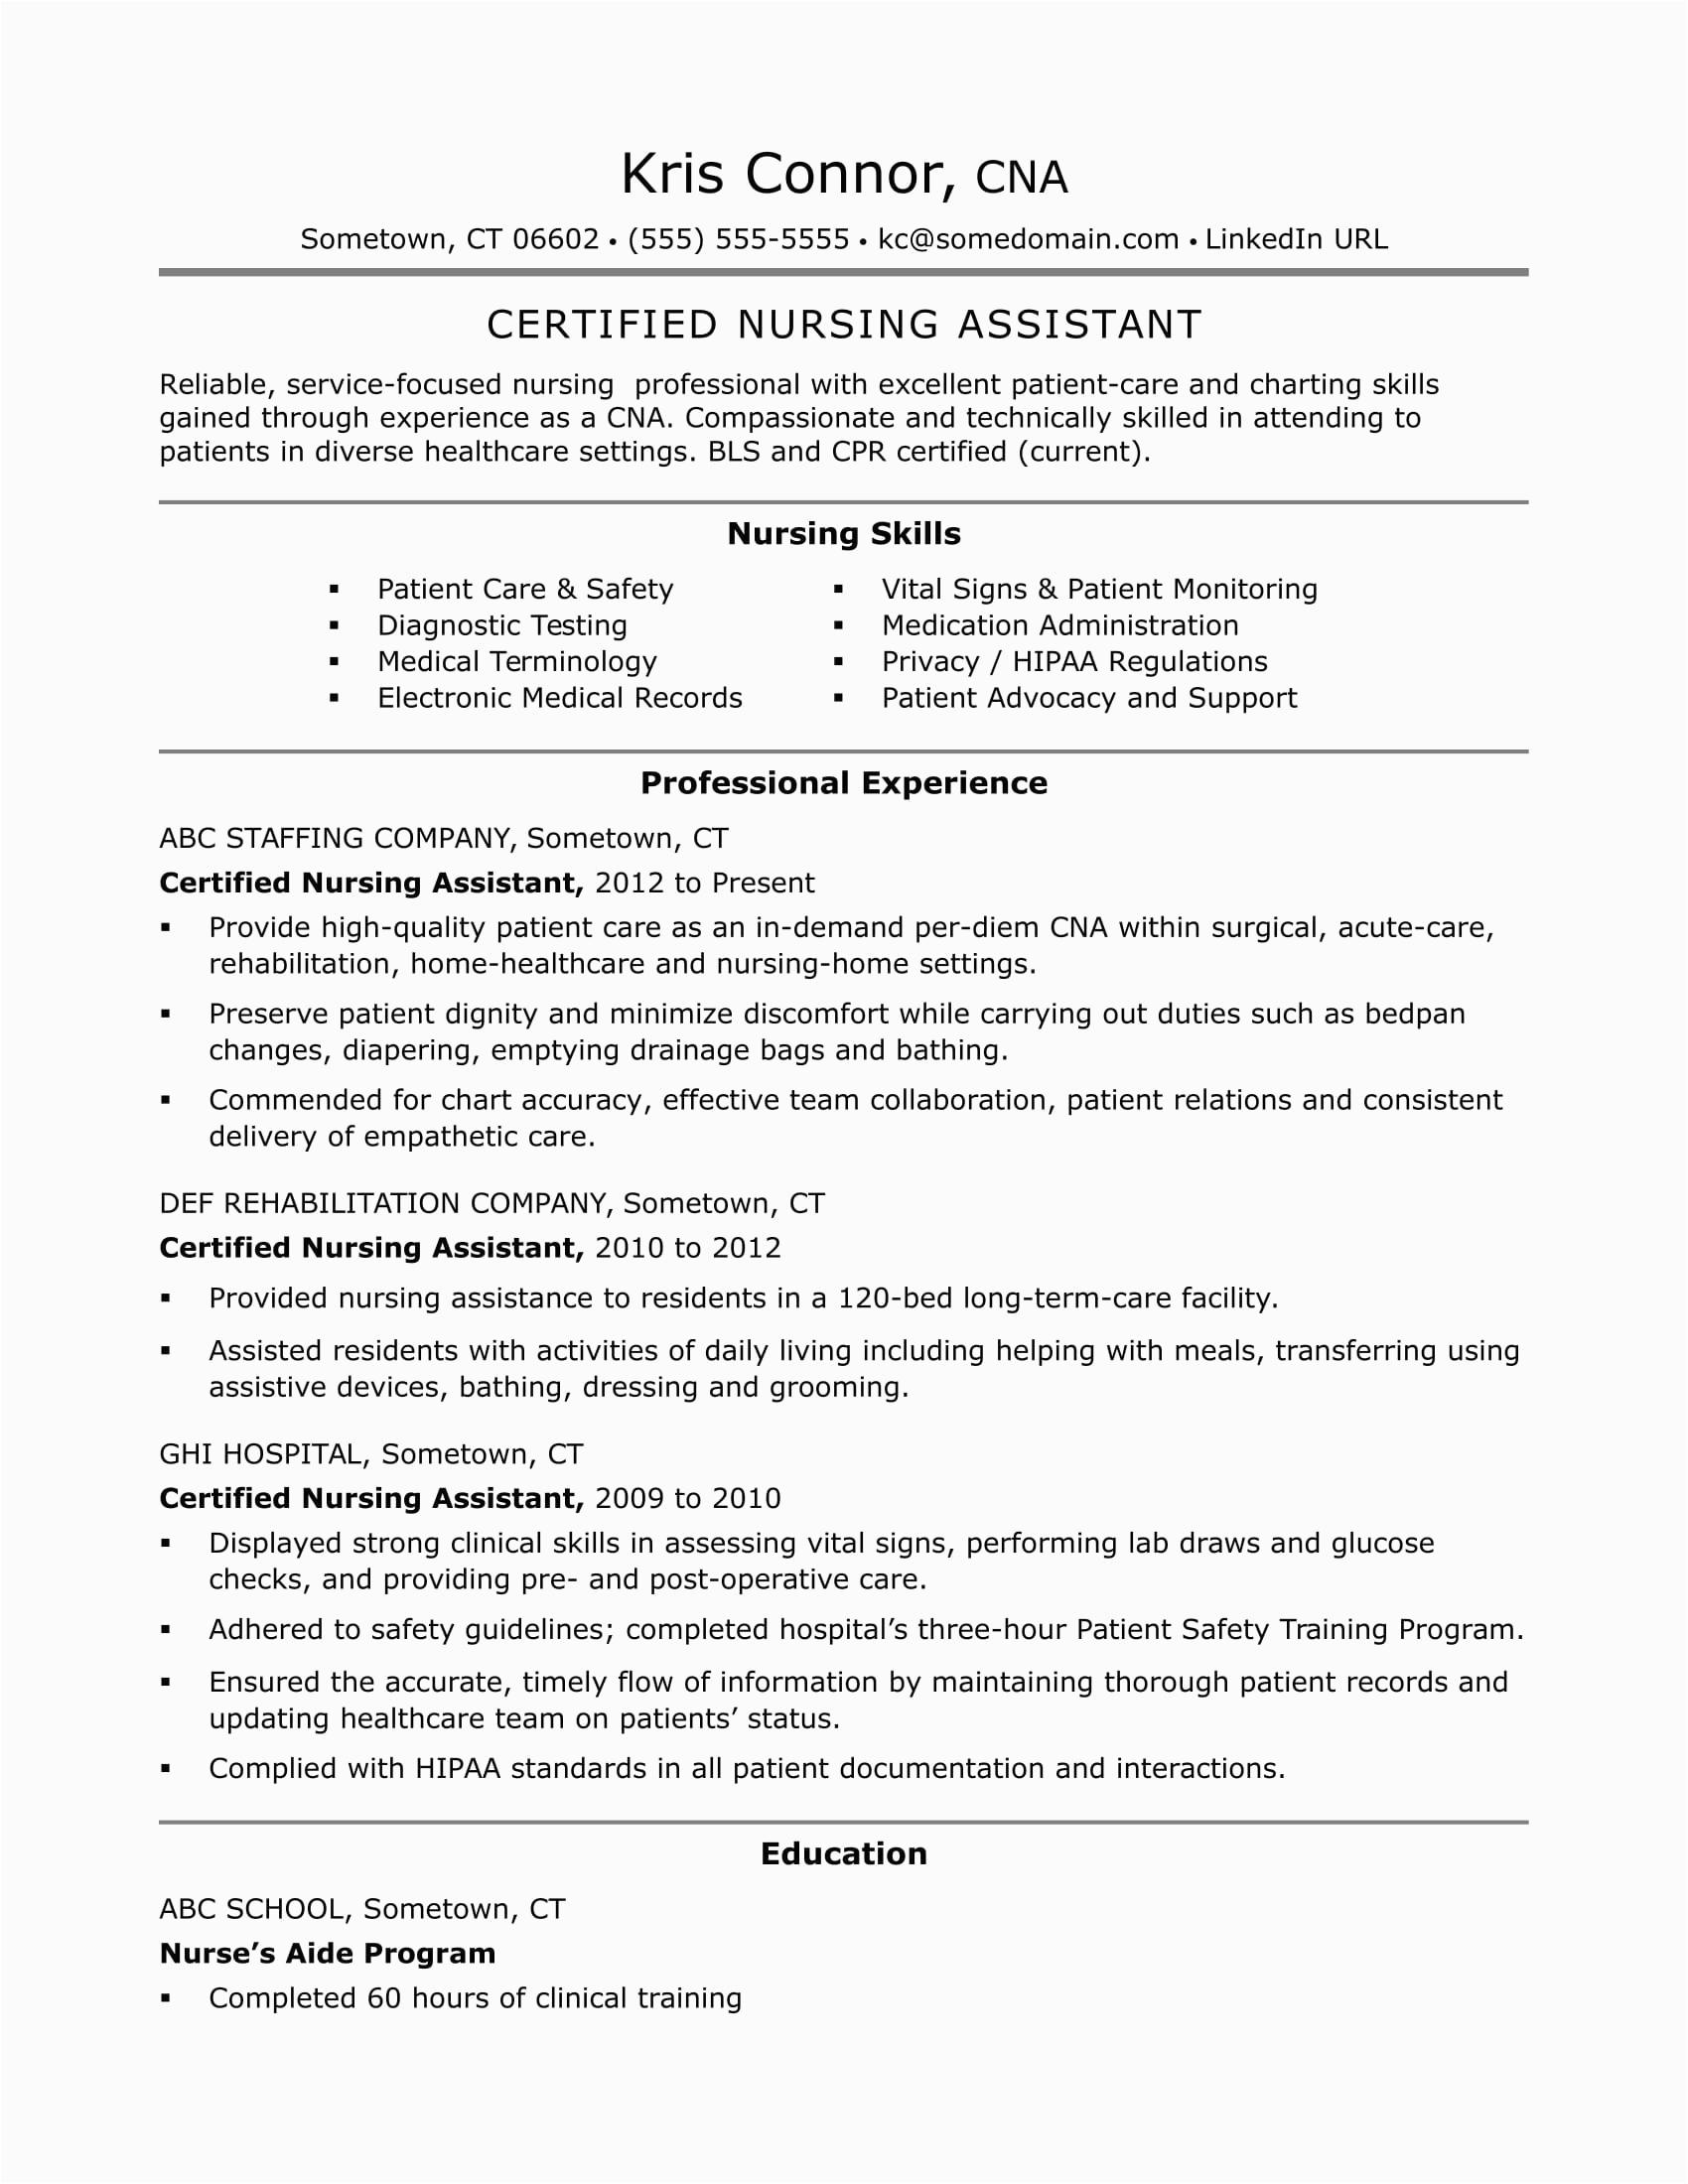 Certified Nursing assistant Resume Sample with Experience Cna Resume Examples Skills for Cnas